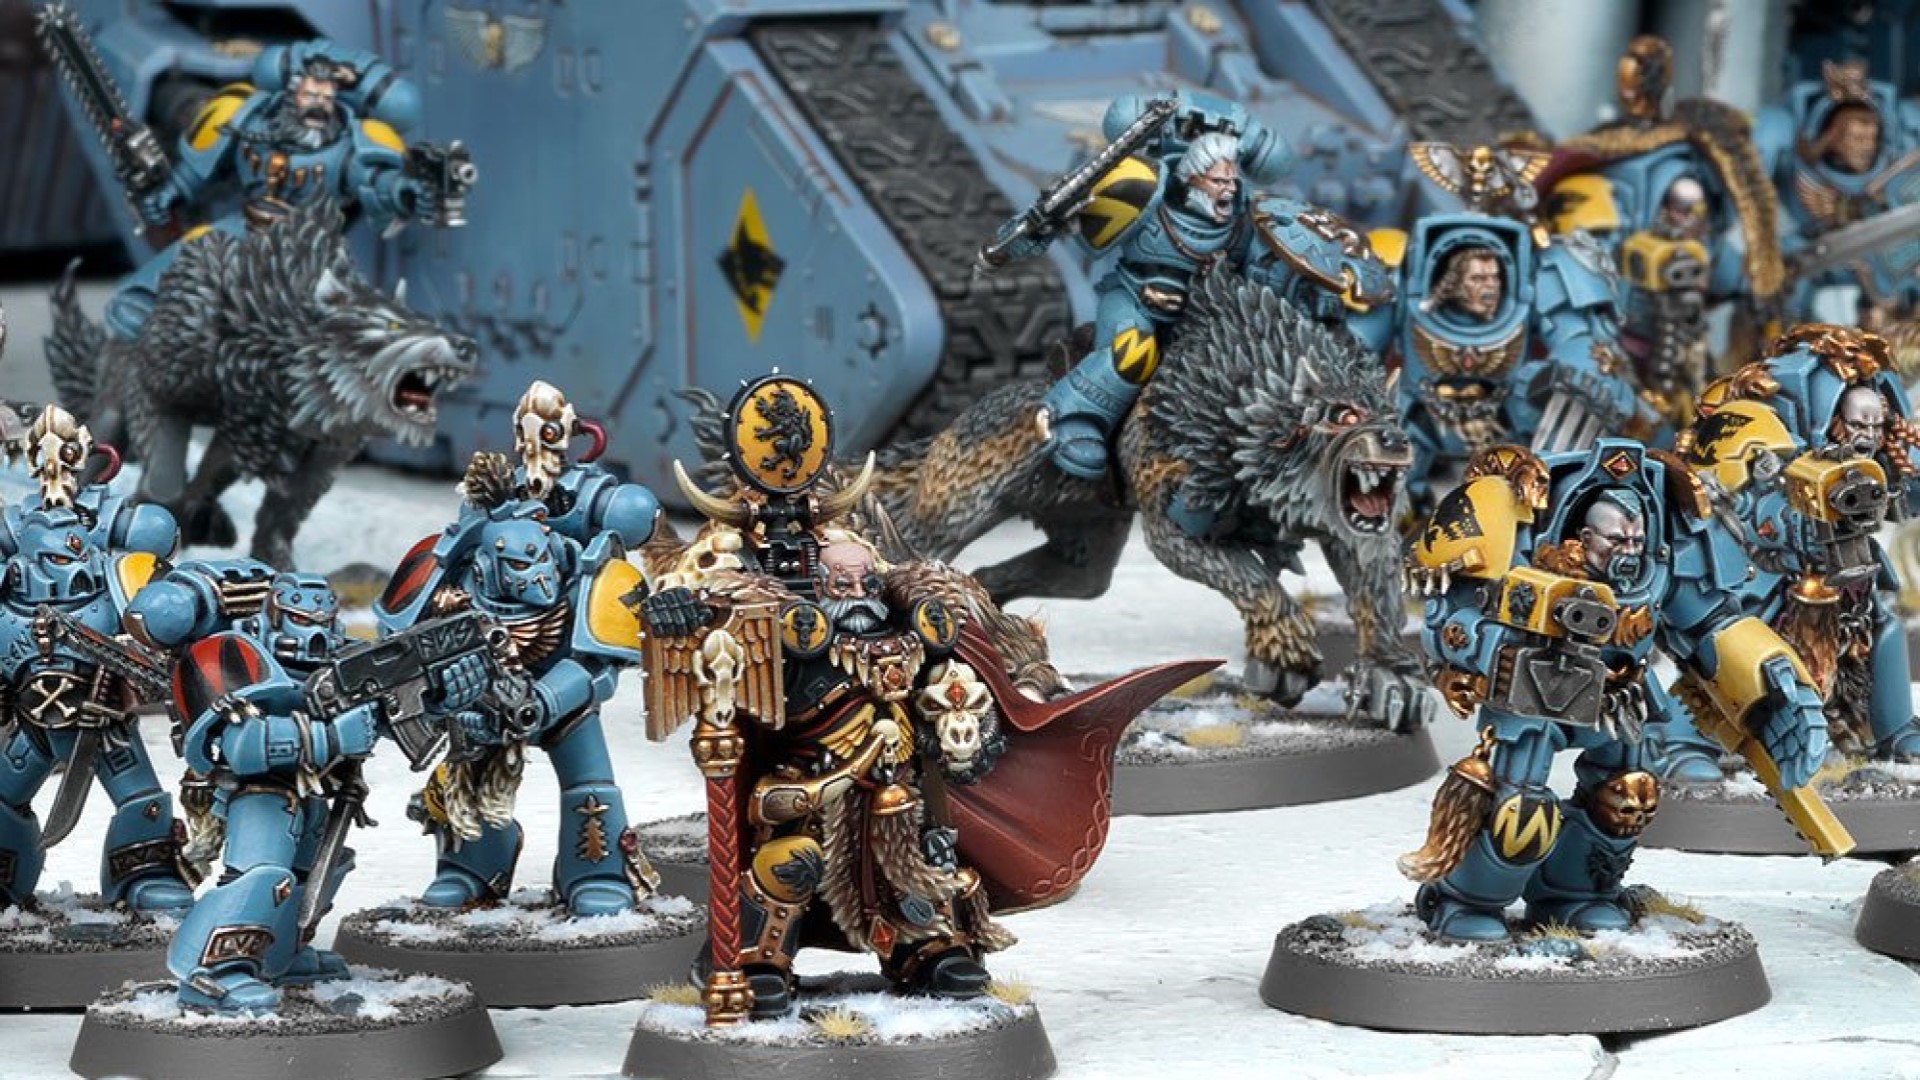 Warhammer 40k Space Marines guide - Warhammer Community photo showing Space Wolves models including Ulfric the Slayer and Wolf Guard terminators